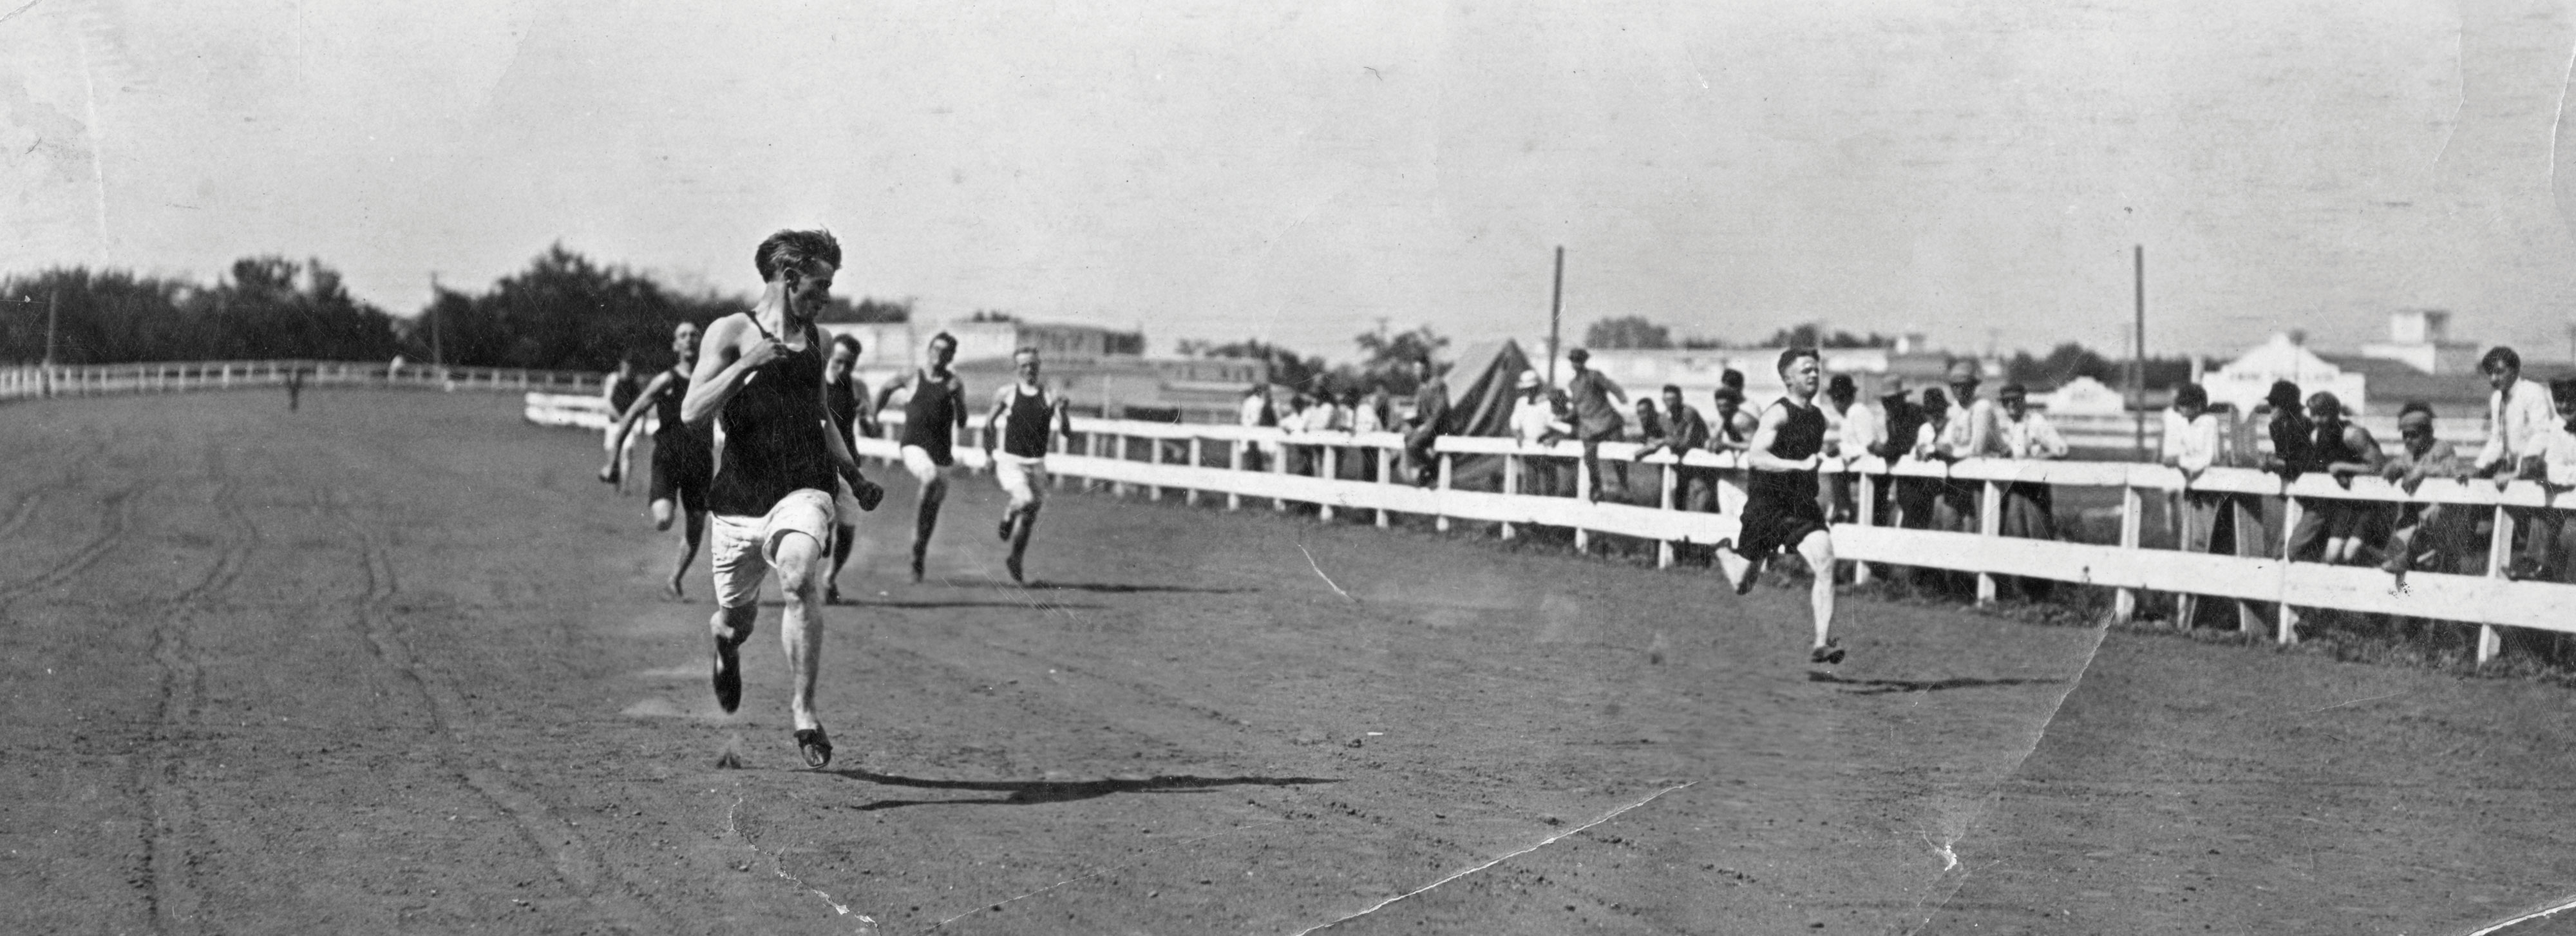 Ed Gallagher wins the 220-yard dash in 22.2 seconds on a dirt track. He would hold the state record of 21.6 seconds for decades.